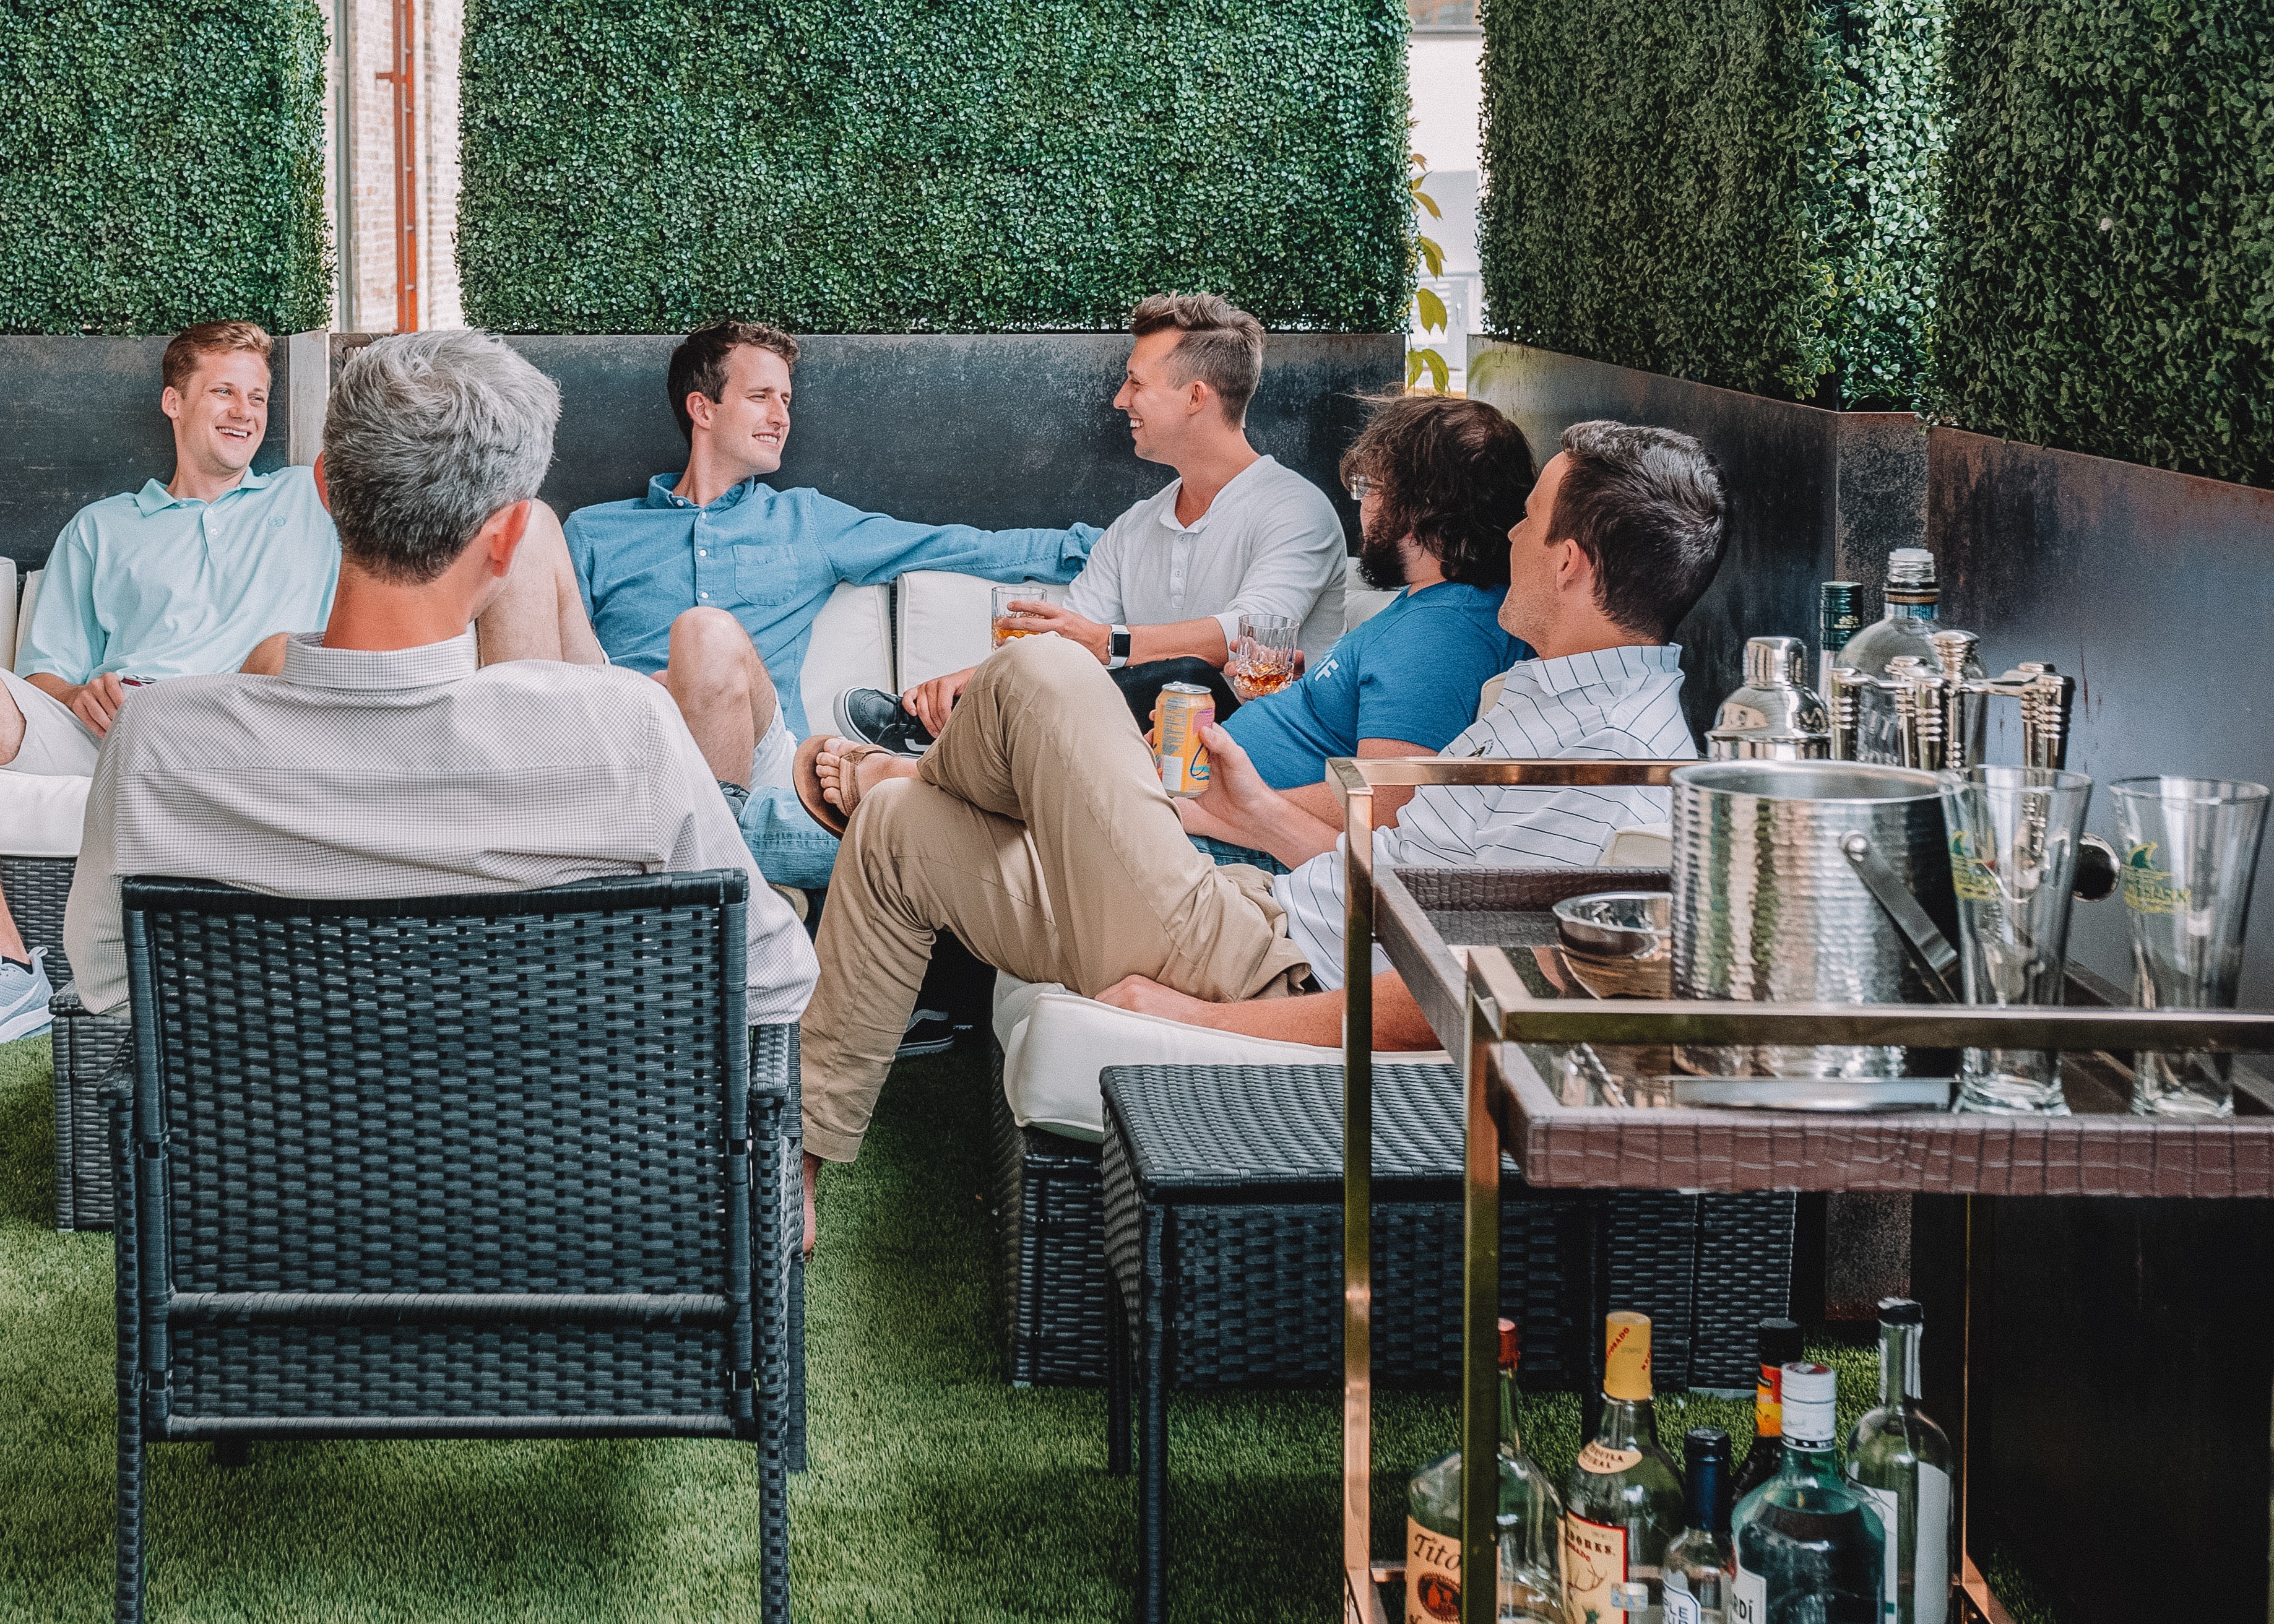 The picture in the section that begins with “industry leaders” shows a group of middle-aged businessmen in casual wear sitting on an L-shaped couch with a hedge screen in a raised grey planter with a solid green well-trimmed hedge. An older, well-groomed man sits in a chair with his back to the camera. The furniture is patio high-end medium grey wicker. They look like they are having a casual conversation 